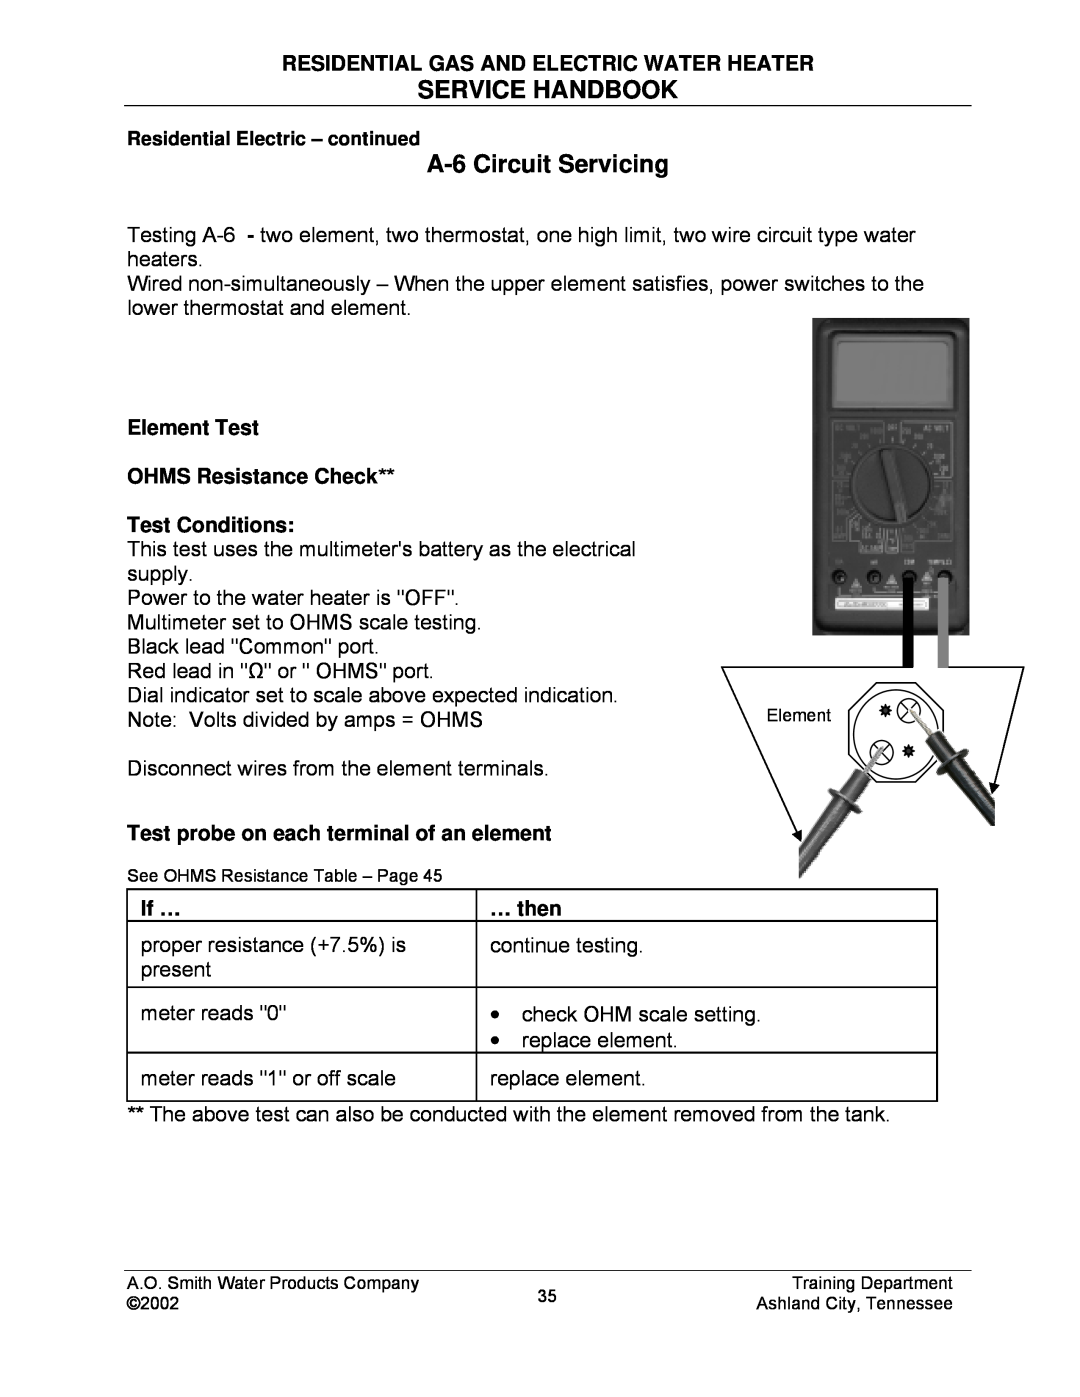 A.O. Smith TC-049-R2 A-6 Circuit Servicing, Service Handbook, Residential Gas And Electric Water Heater, If …, … then 